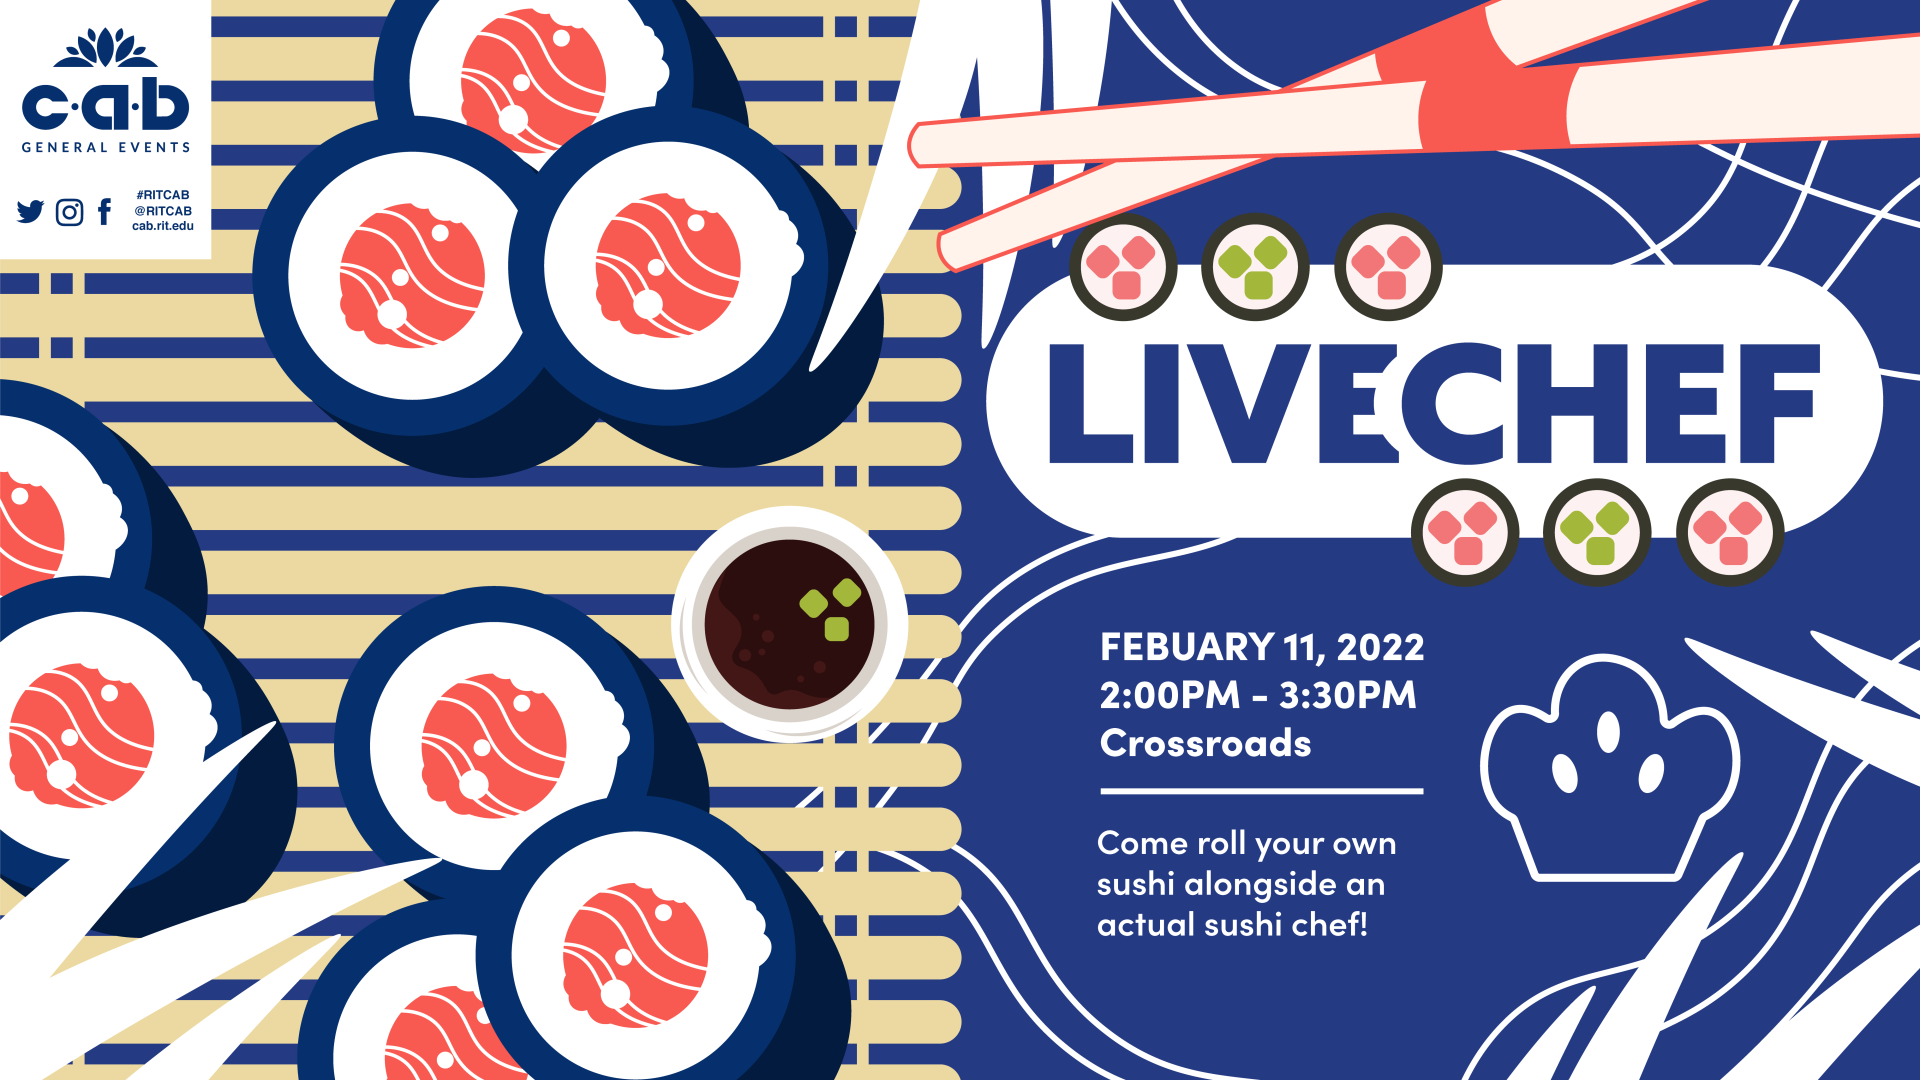 design with several sushi rolls, chopsticks, and text "Live Chef, Feb. 11, 2022, 2-3:30 pm, Crossroads, Come roll your own sushi alongside an actual sushi chef"